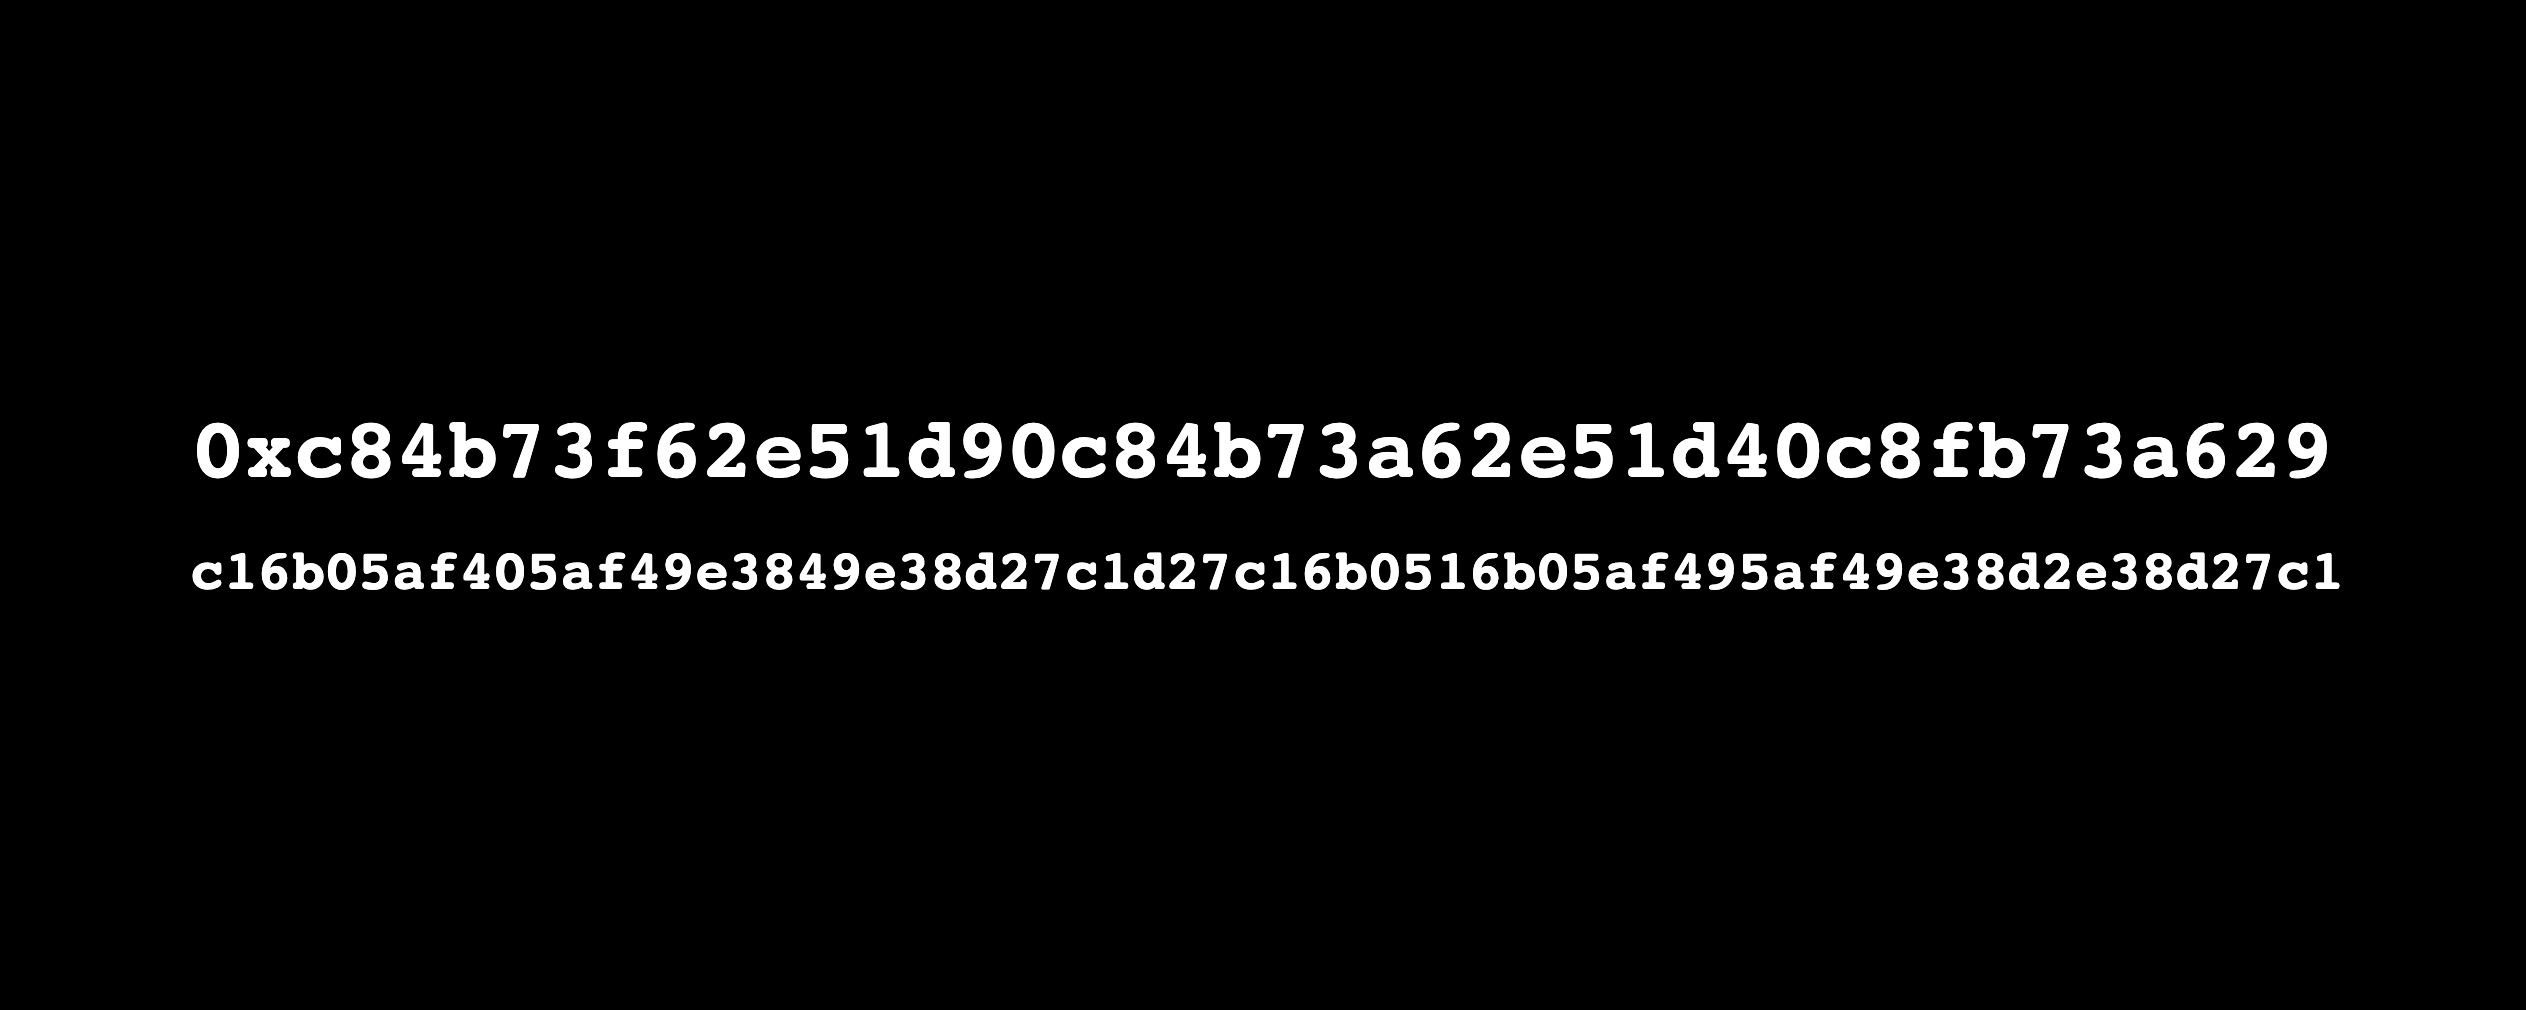 Two lines of randomized, white, hexadecimal characters centered on a black background. The first line is 40 characters long and reads: Oxc84673162e51d90c84673a62e51d40c8fb73a629. The second line is 64 characters long and reads: c16605a1405a149e3849e38d27c1d27c1660516605a1495a149e38d2e38d27c1